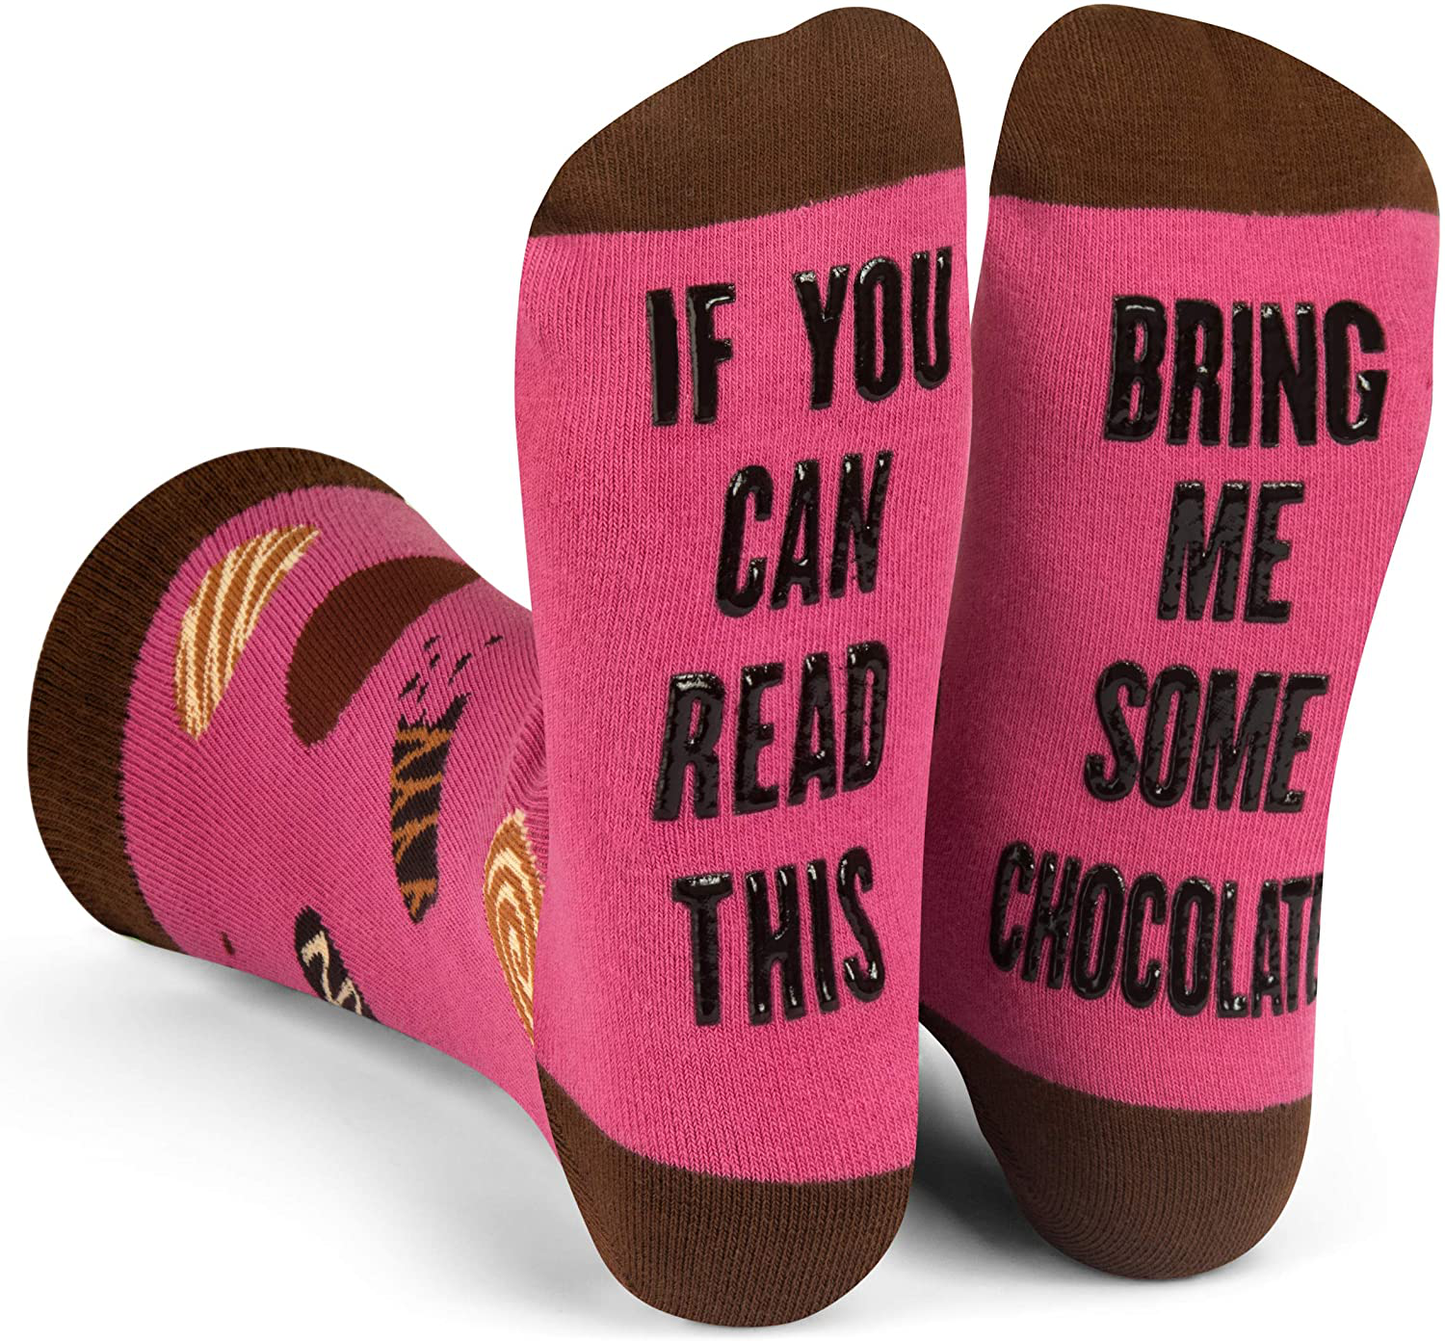 If You Can Read This, Bring Me Some - Funny Food Socks Novelty Christmas Gift & Secret Santa Idea for Men and Women